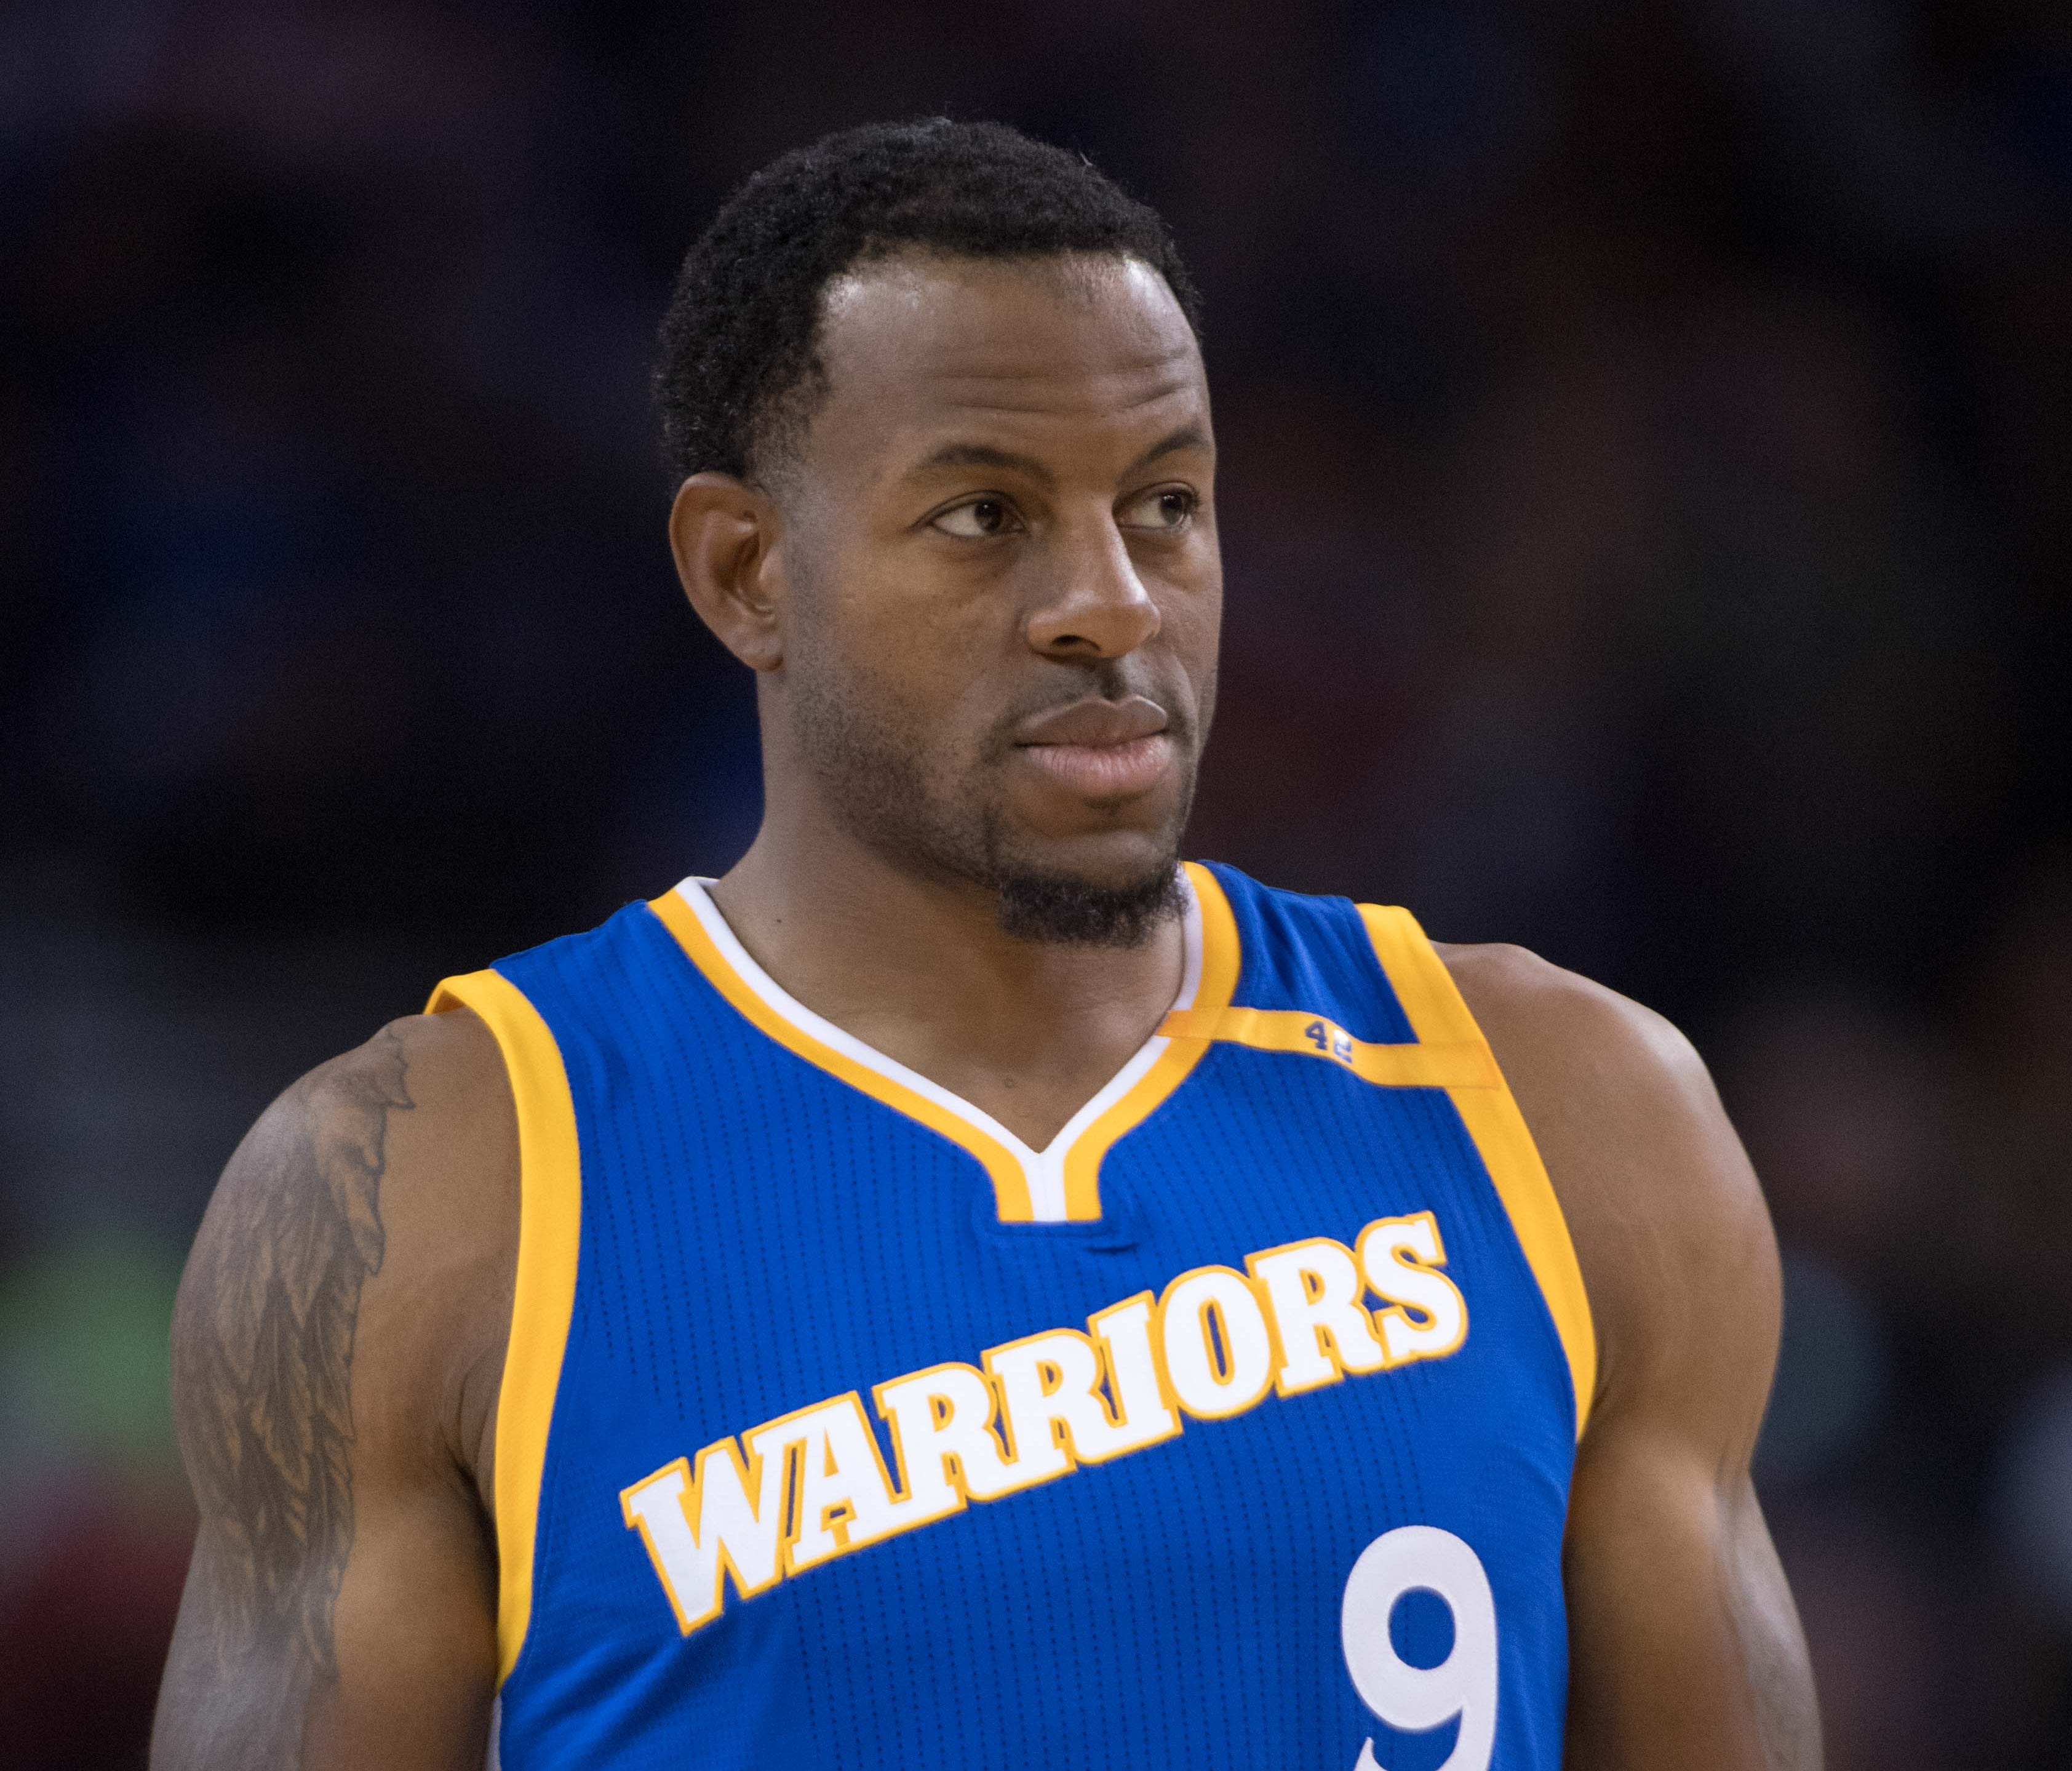 Andre Iguodala during the second quarter against the Phoenix Suns at Oracle Arena.